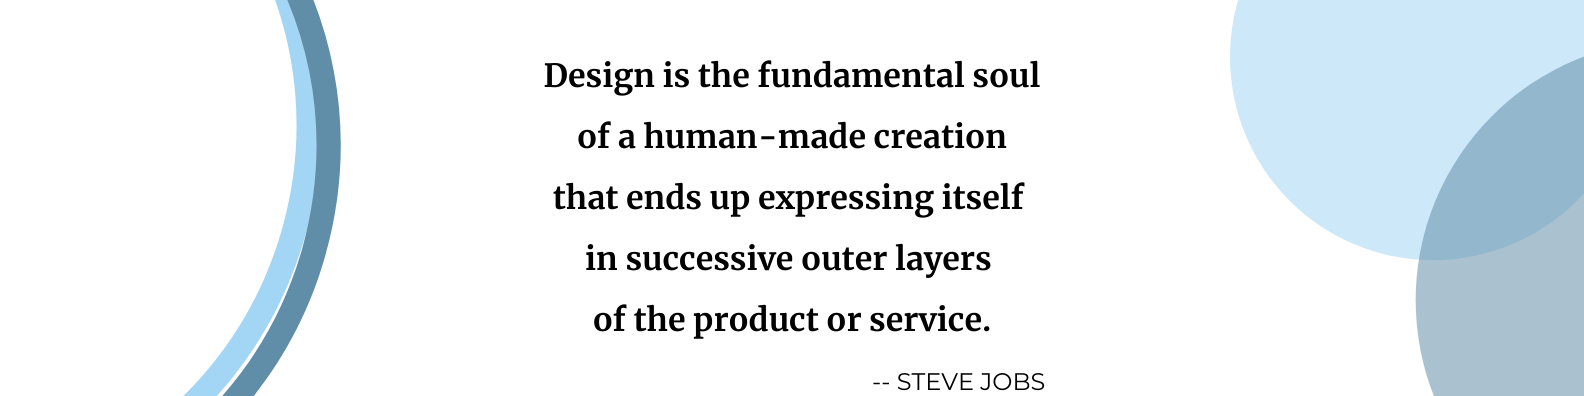 Steve Jobs says design is the fundamental tool of a human-made creation that ends up expressing itself in successive outer layers of the product or service.